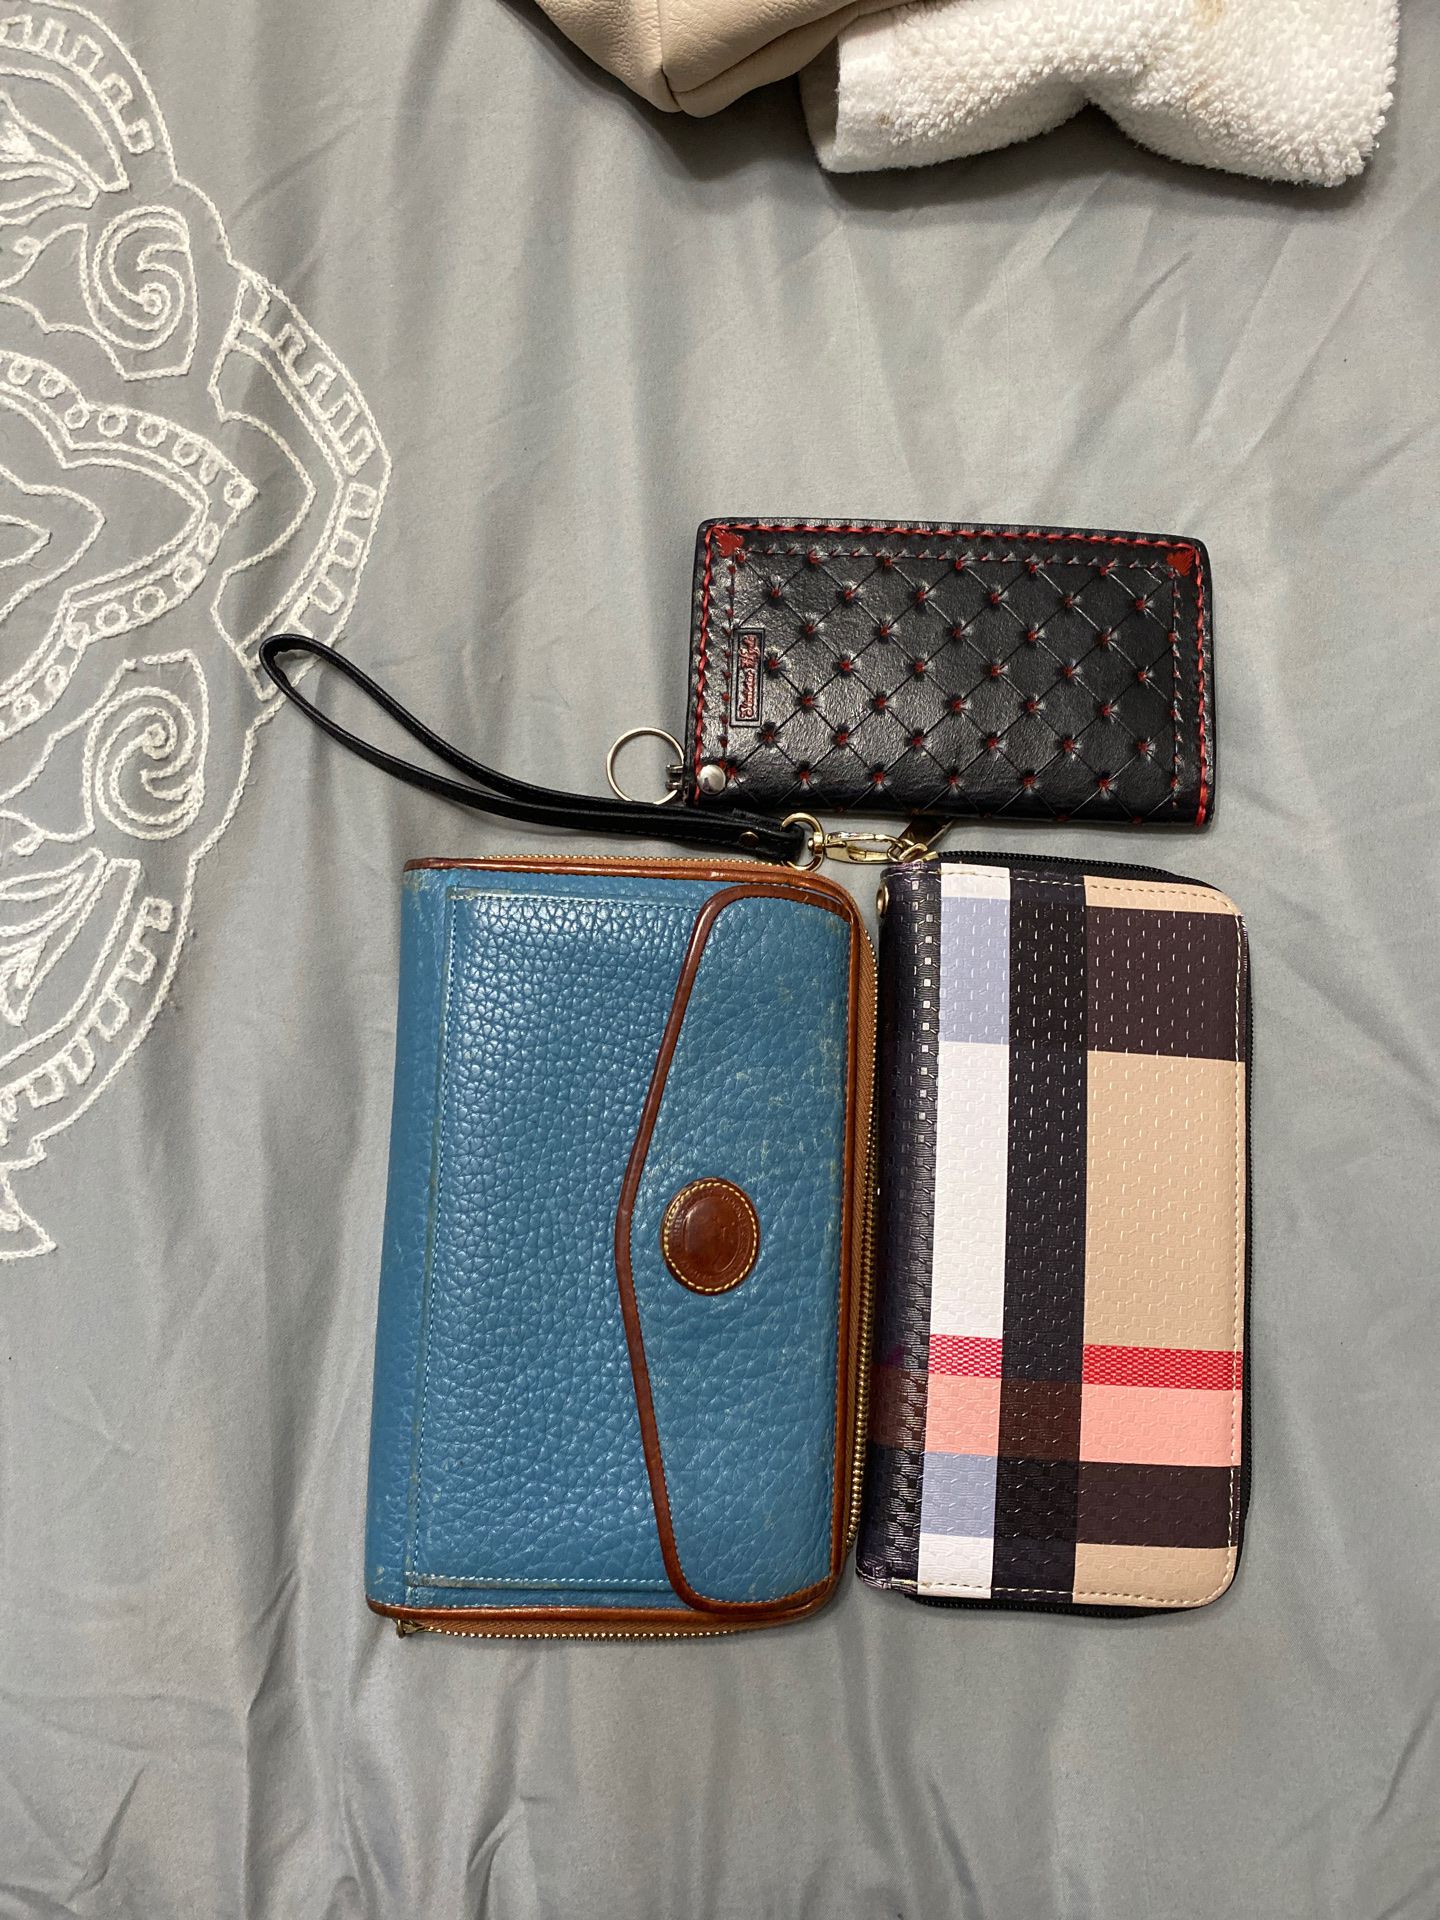 3 Wallets- Dooney and Burke, 1 handmade leather